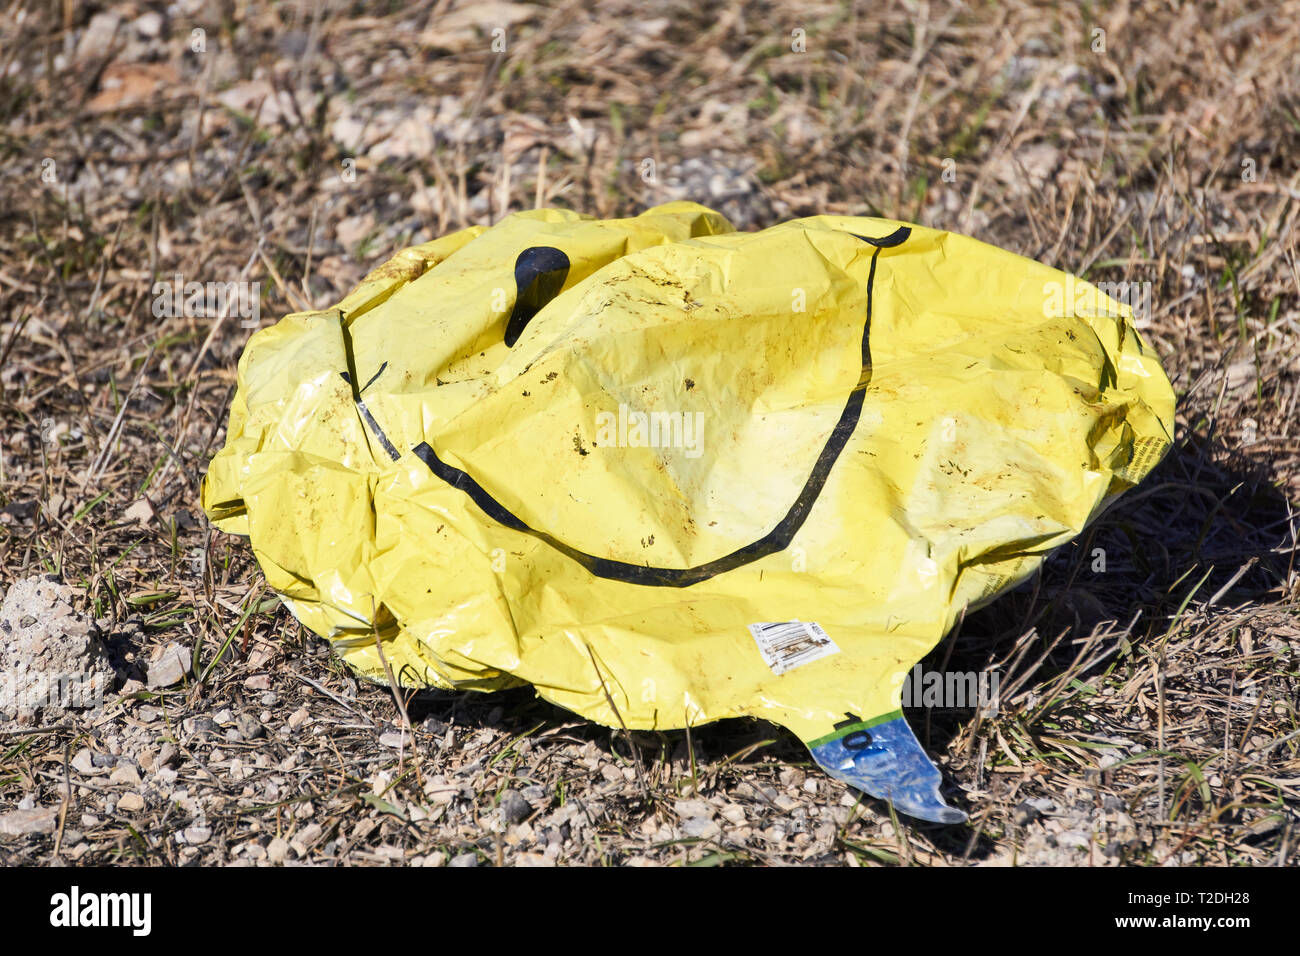 empty-deflated-mylar-smiley-face-yellow-balloon-on-the-ground-outside-T2DH28.jpg